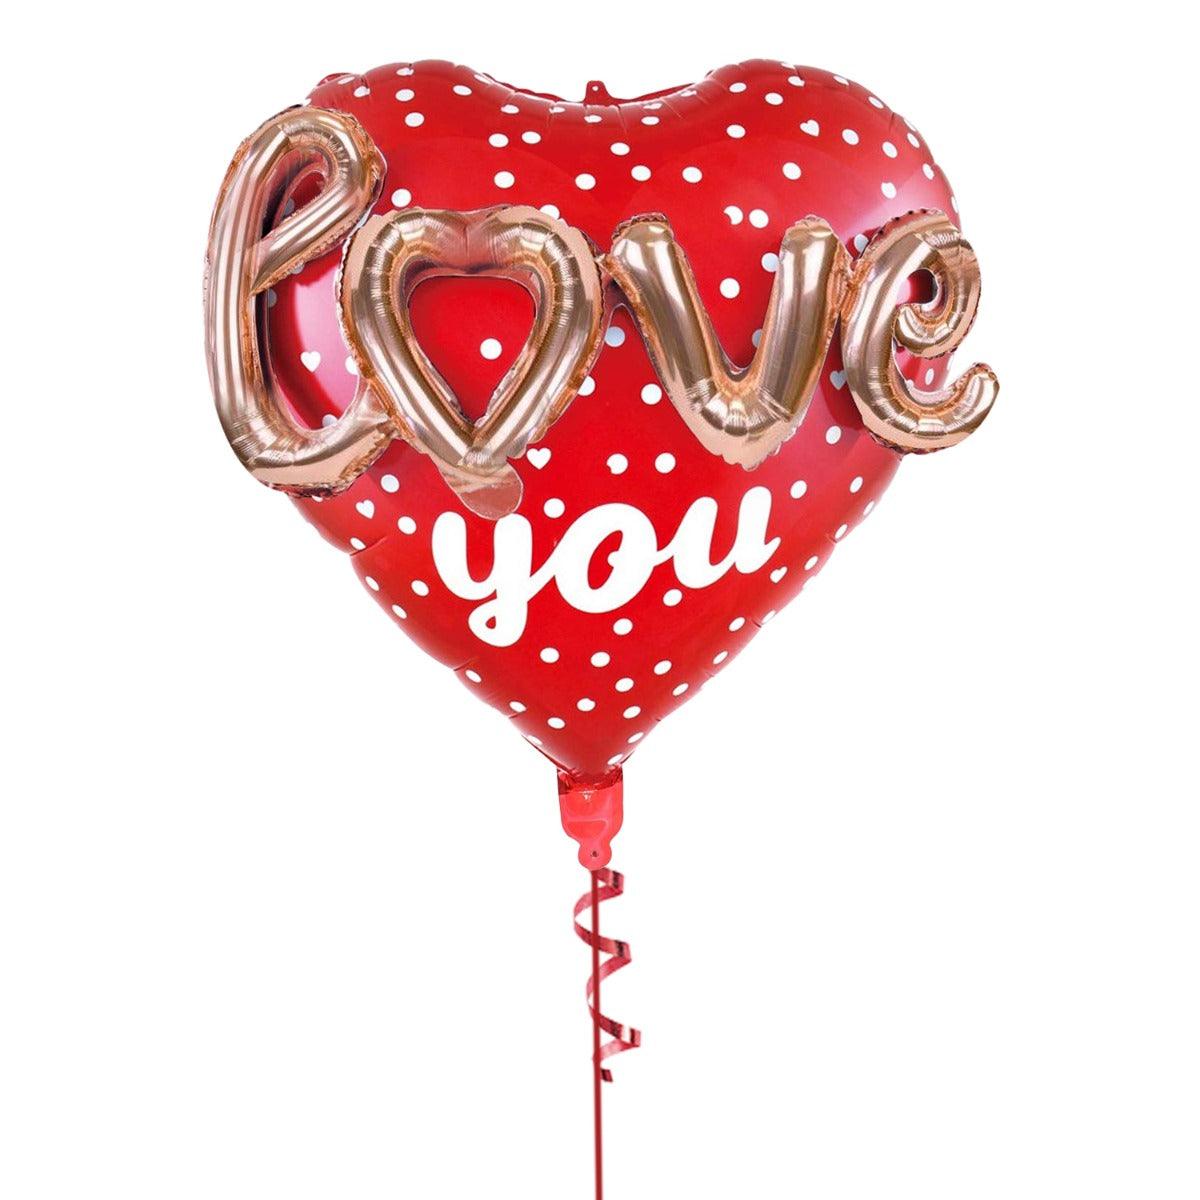 PartyCorp Red Polka Dots Heart With Cursive Rose Gold Love Text 3D Foil Balloon, DIY Pack Of 3